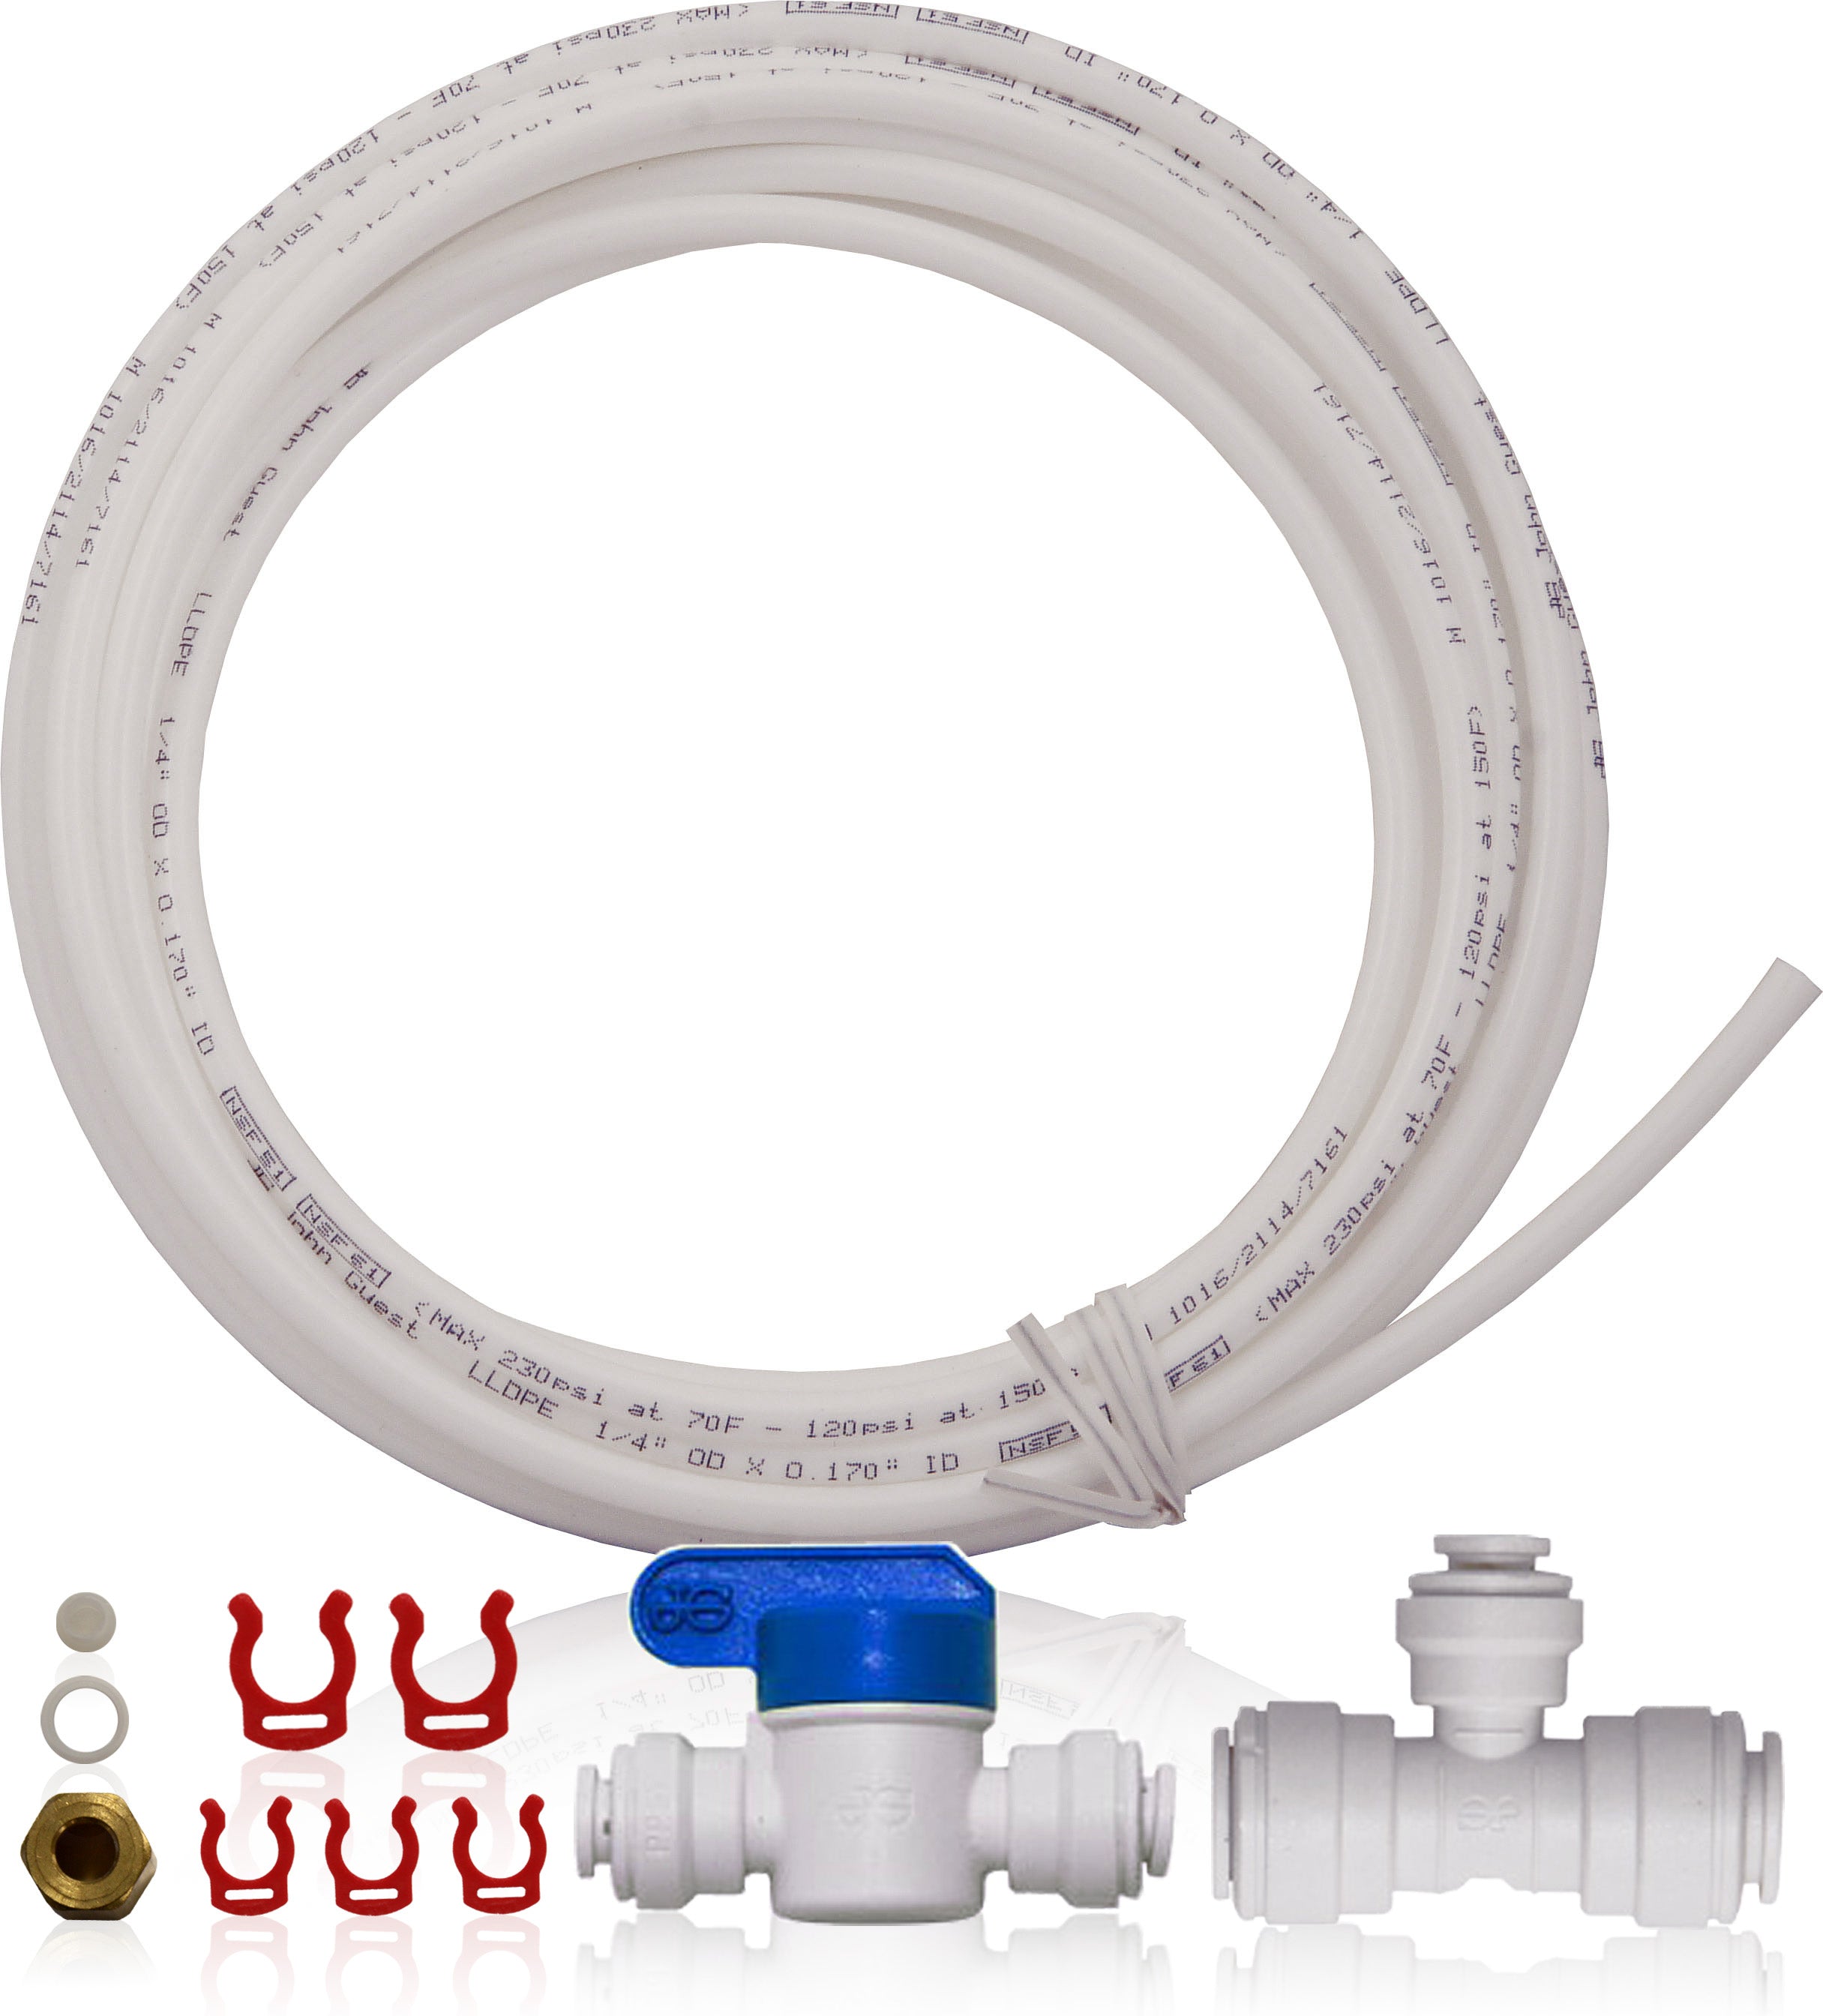 Icemaker Kit for APEC Quick Dispense Reverse Osmosis System - 3/8" to 1/4" OD Tubing